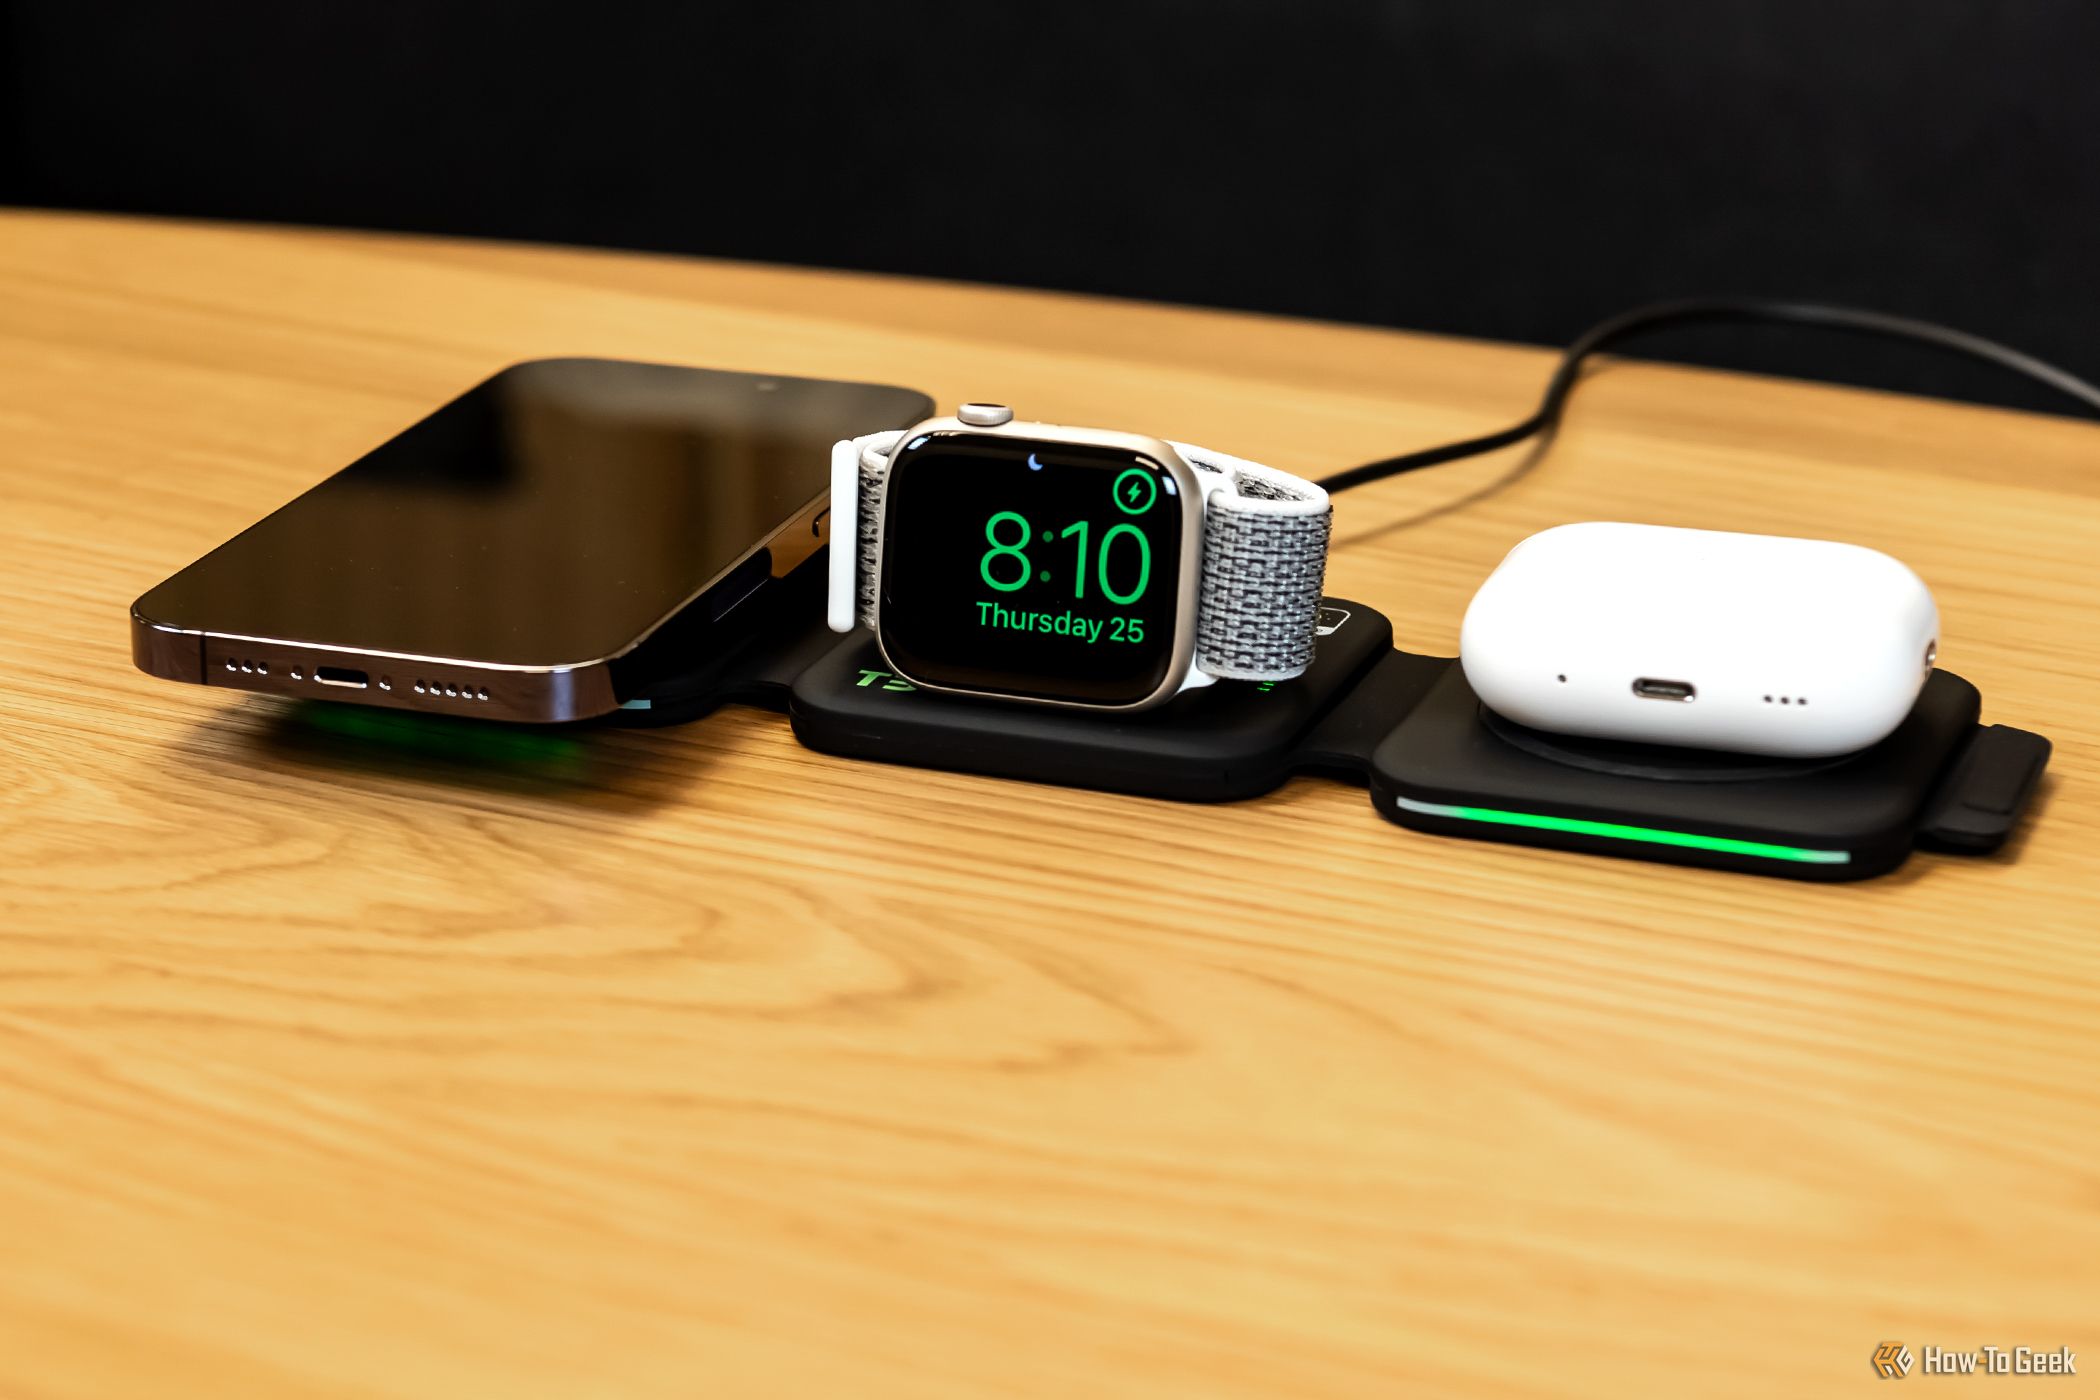 The Infinacore T3 Wireless Charging Station charging an iPhone, Apple Watch, and AirPods